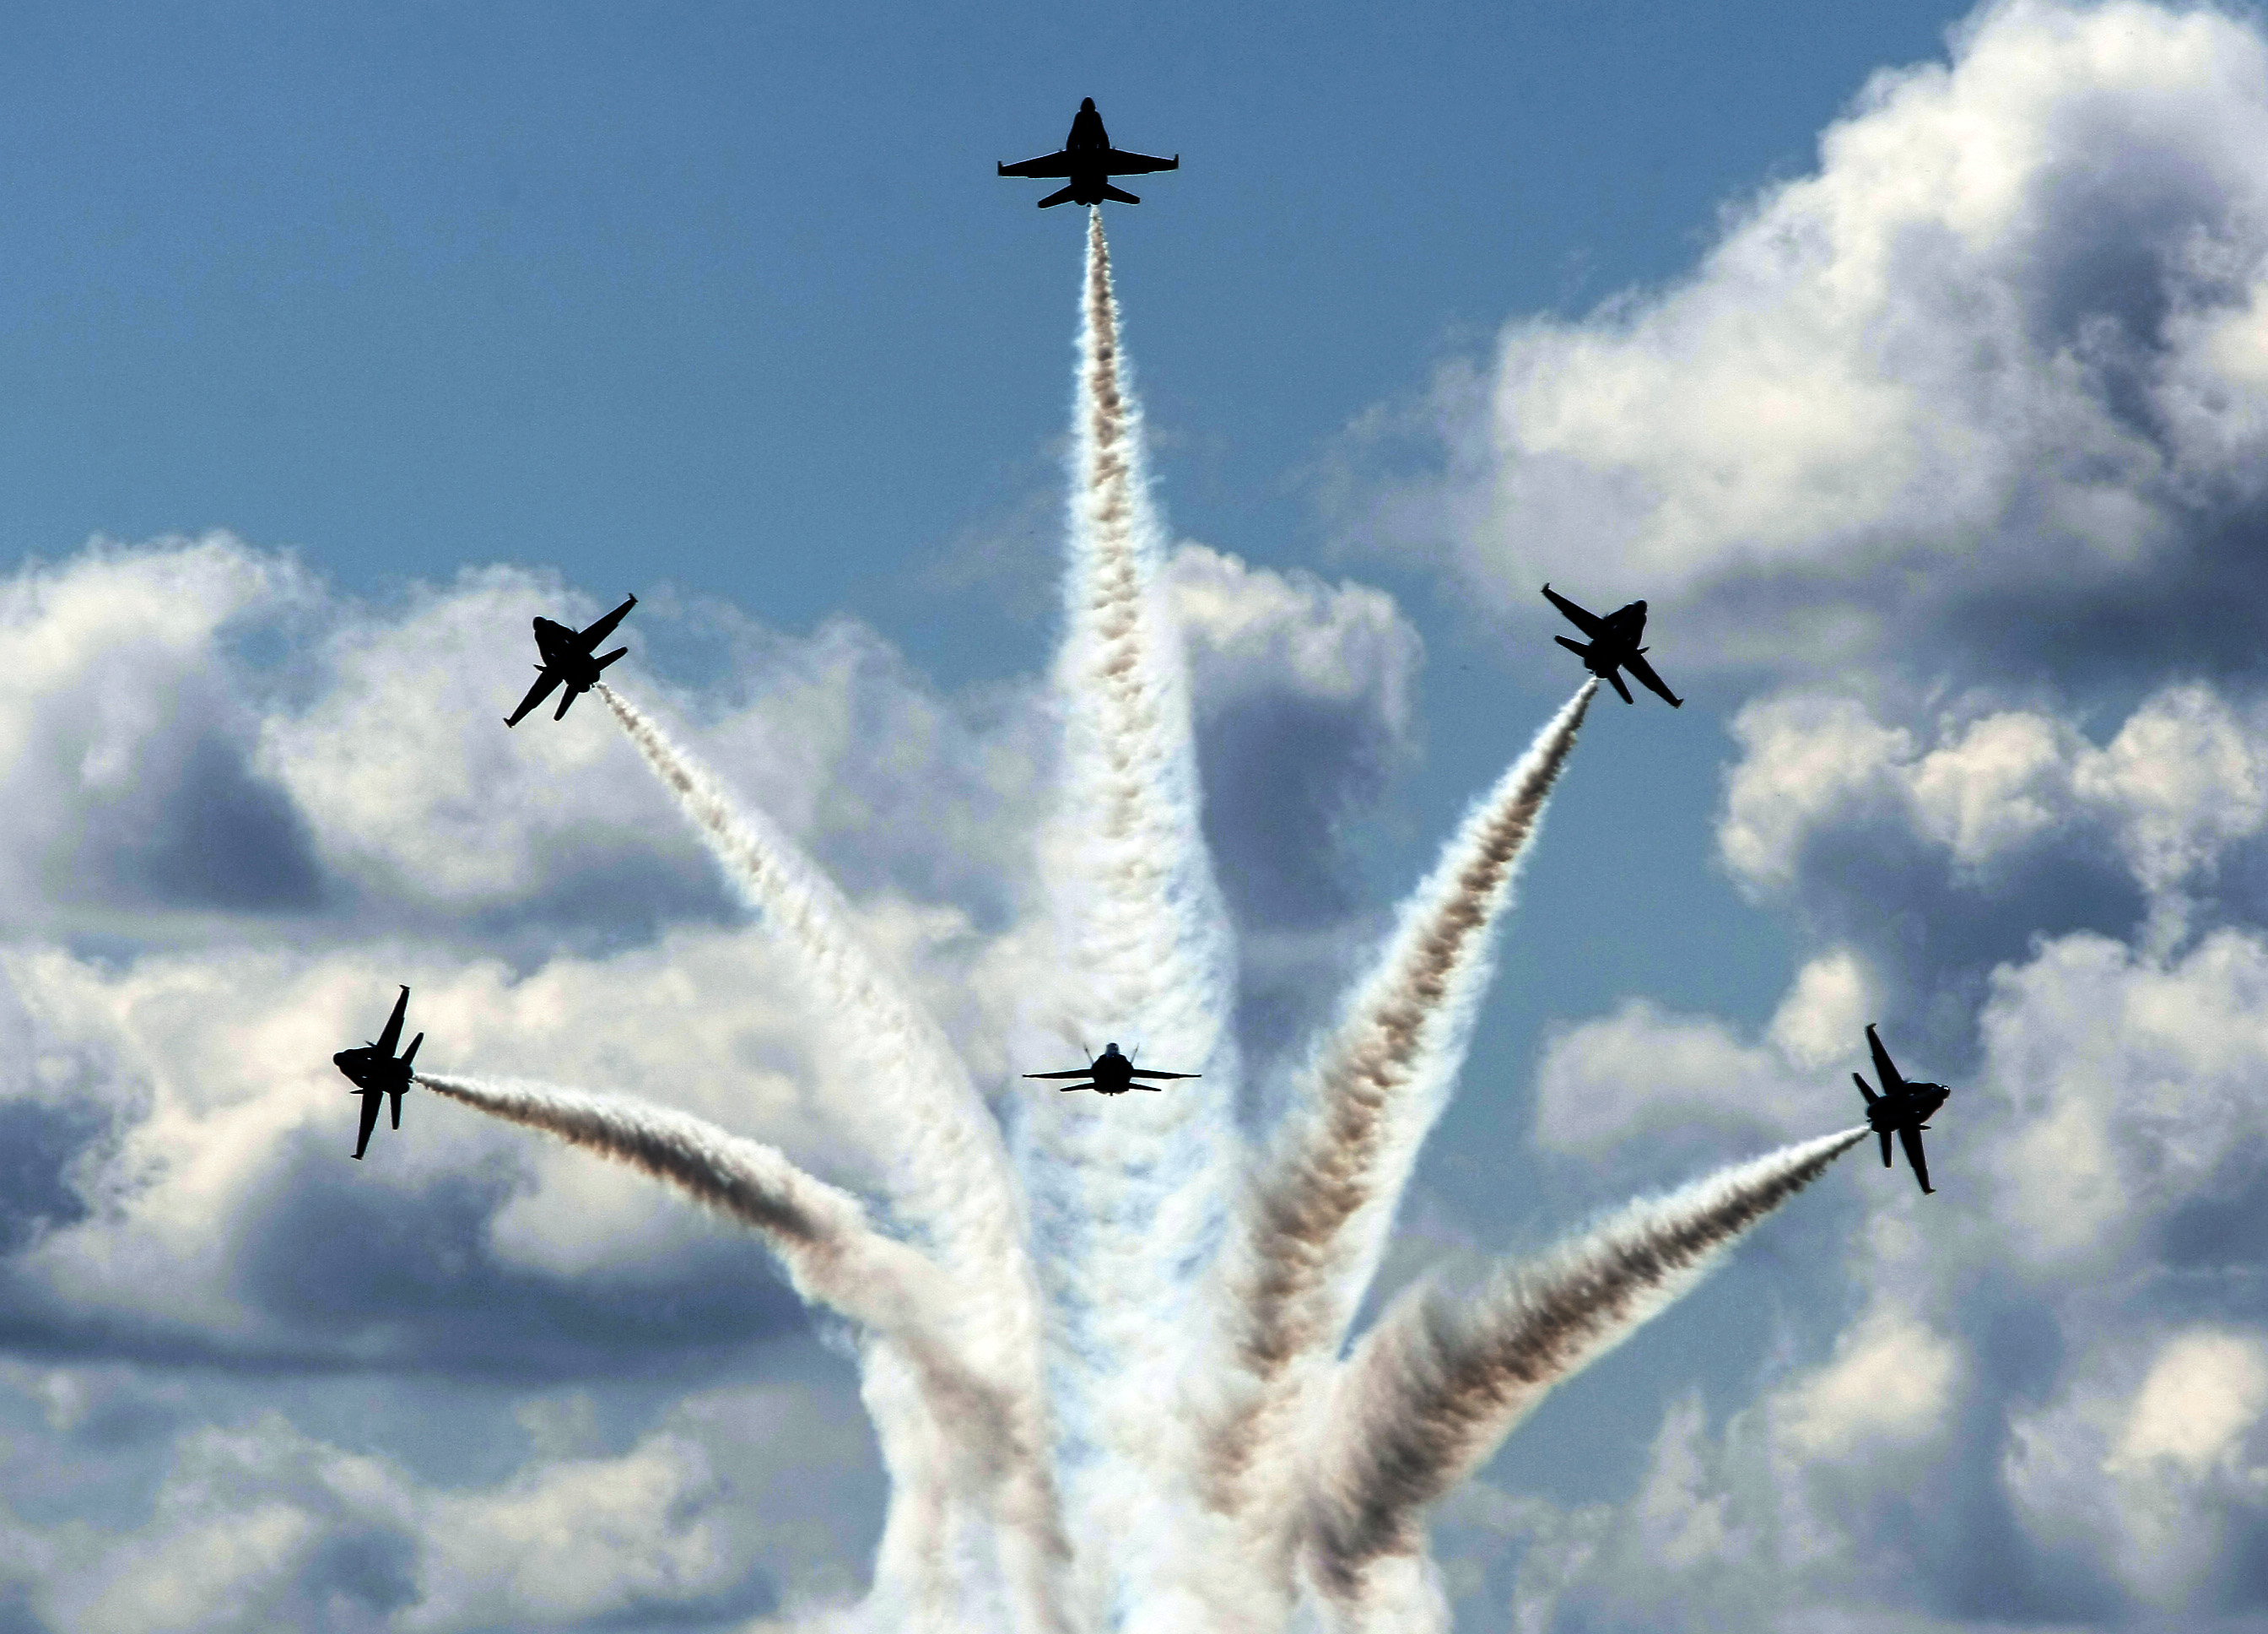 The Blue Angels Fly Over A Beach | Aviation Blog